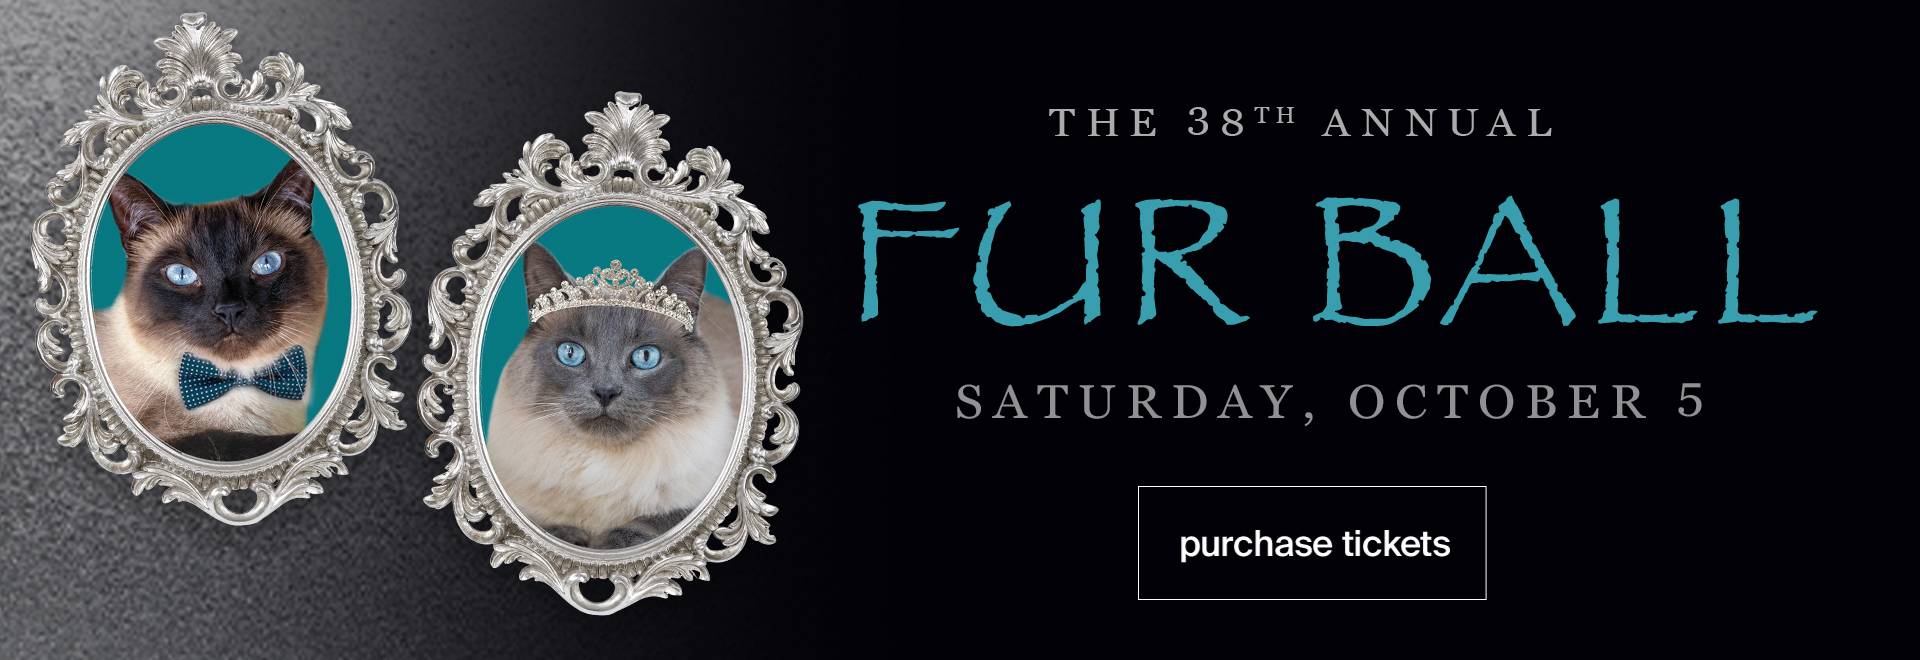 The 38th Fur Ball Saturday, October 5 | Purchase Tickets